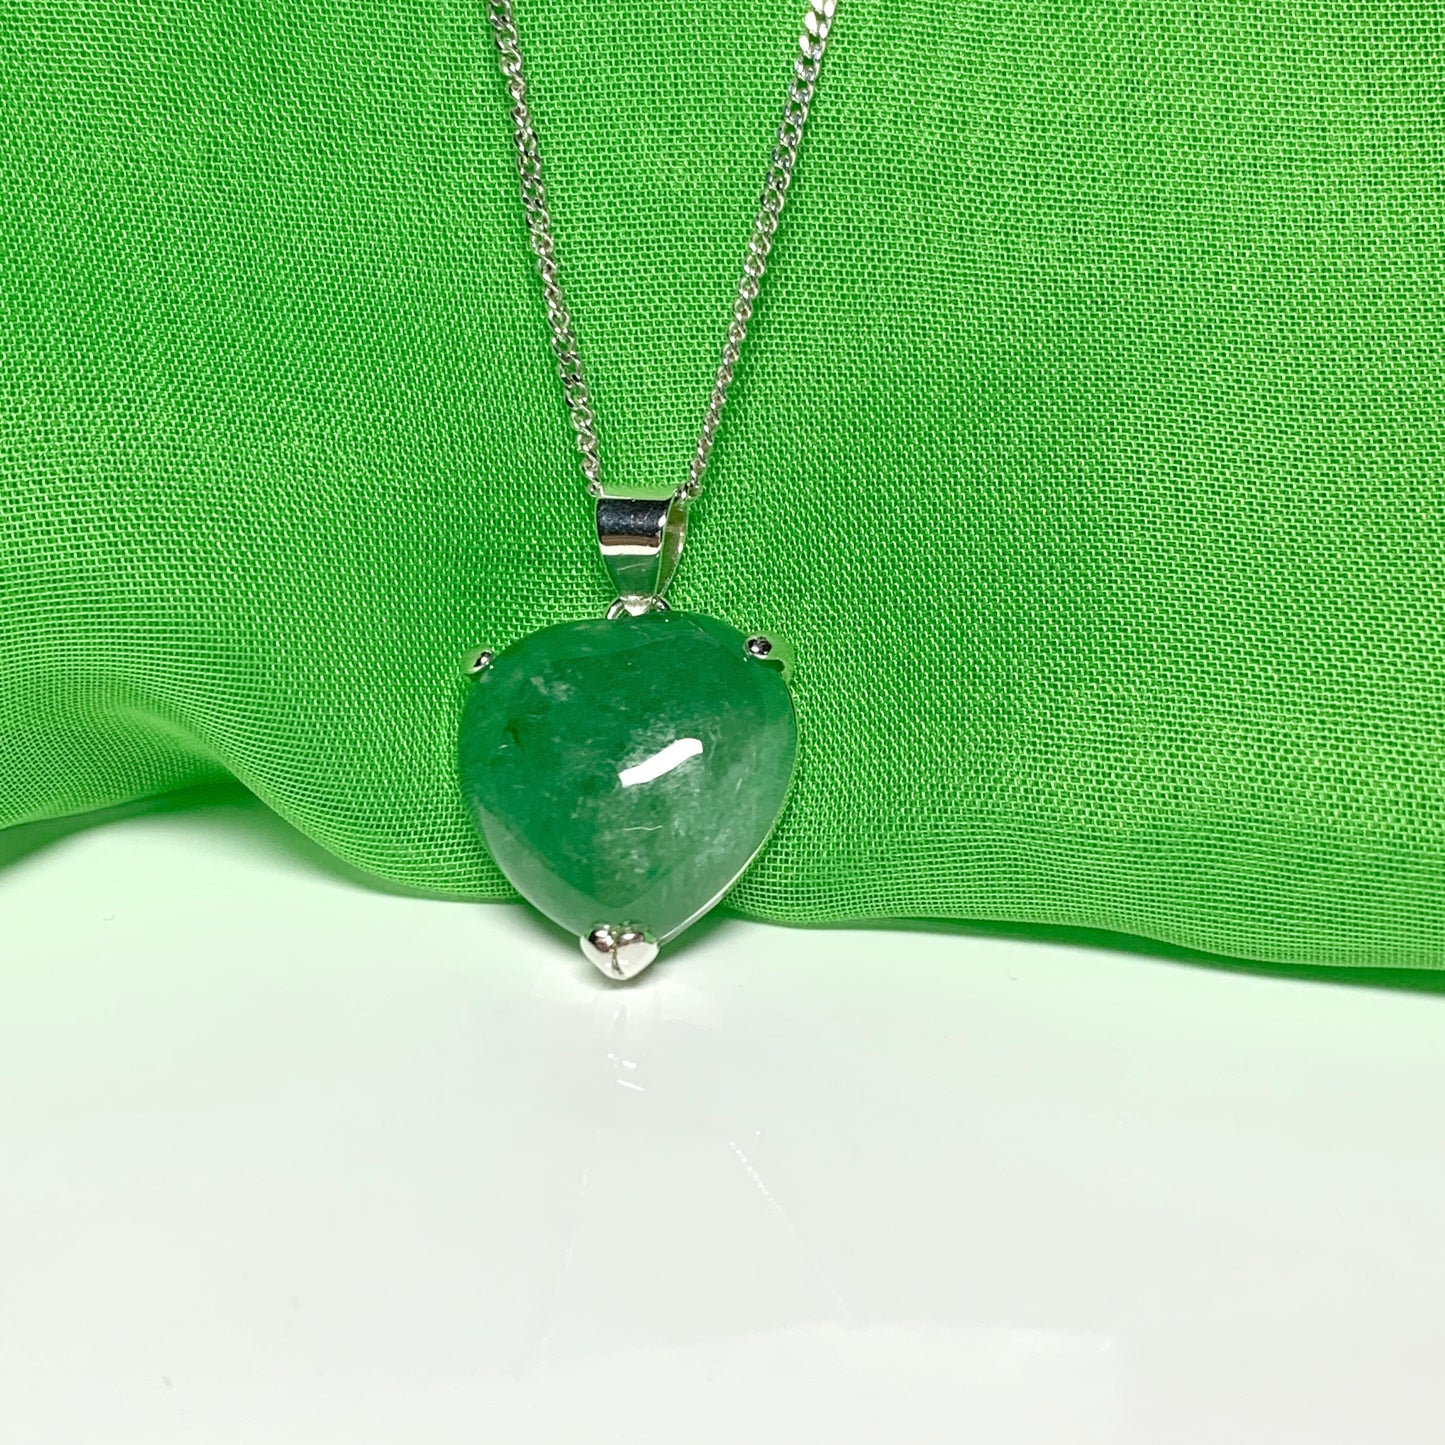 Real Green Jade Necklace Heart Shaped Sterling Silver